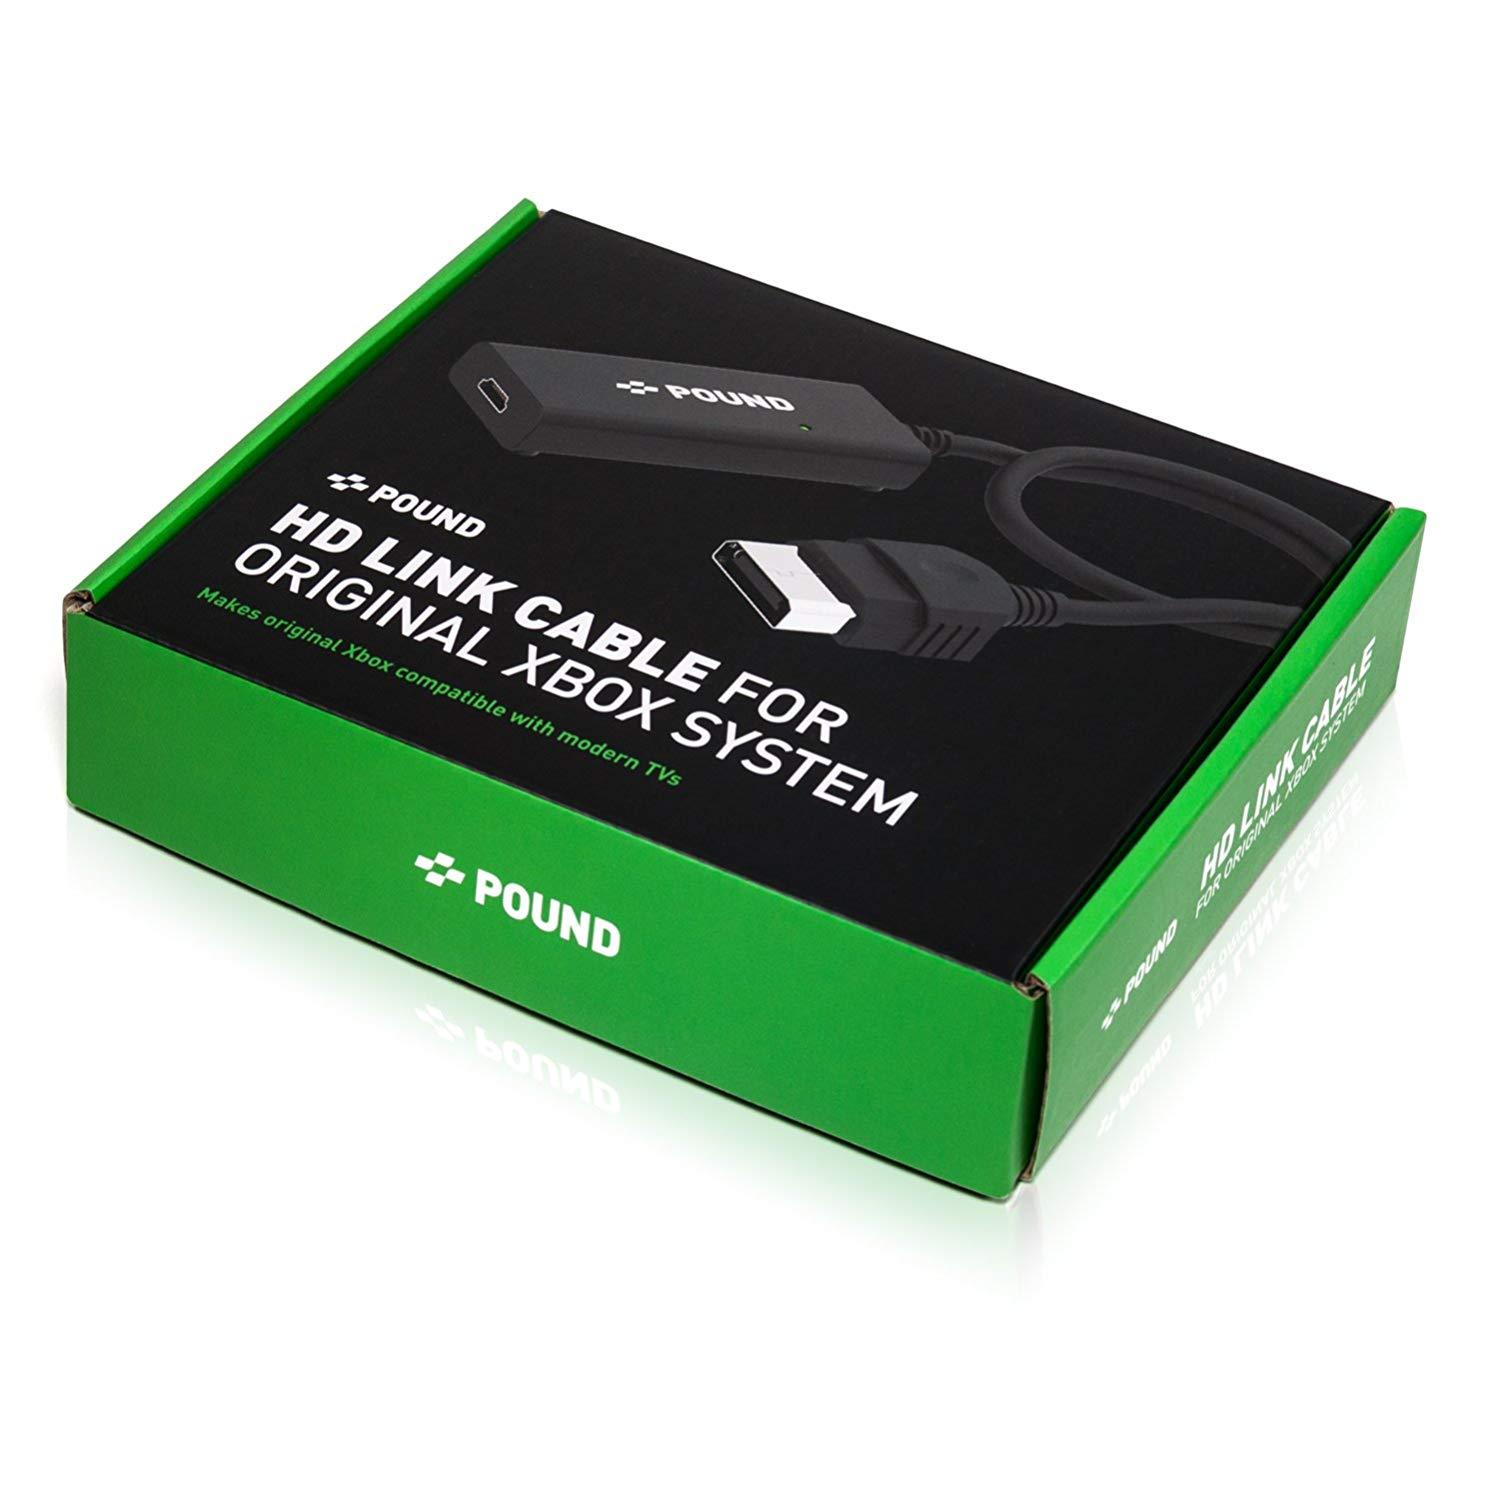 POUND HDMI コンバータ & ケーブル XBOX用 / HD LINK CABLE FOR XBOX